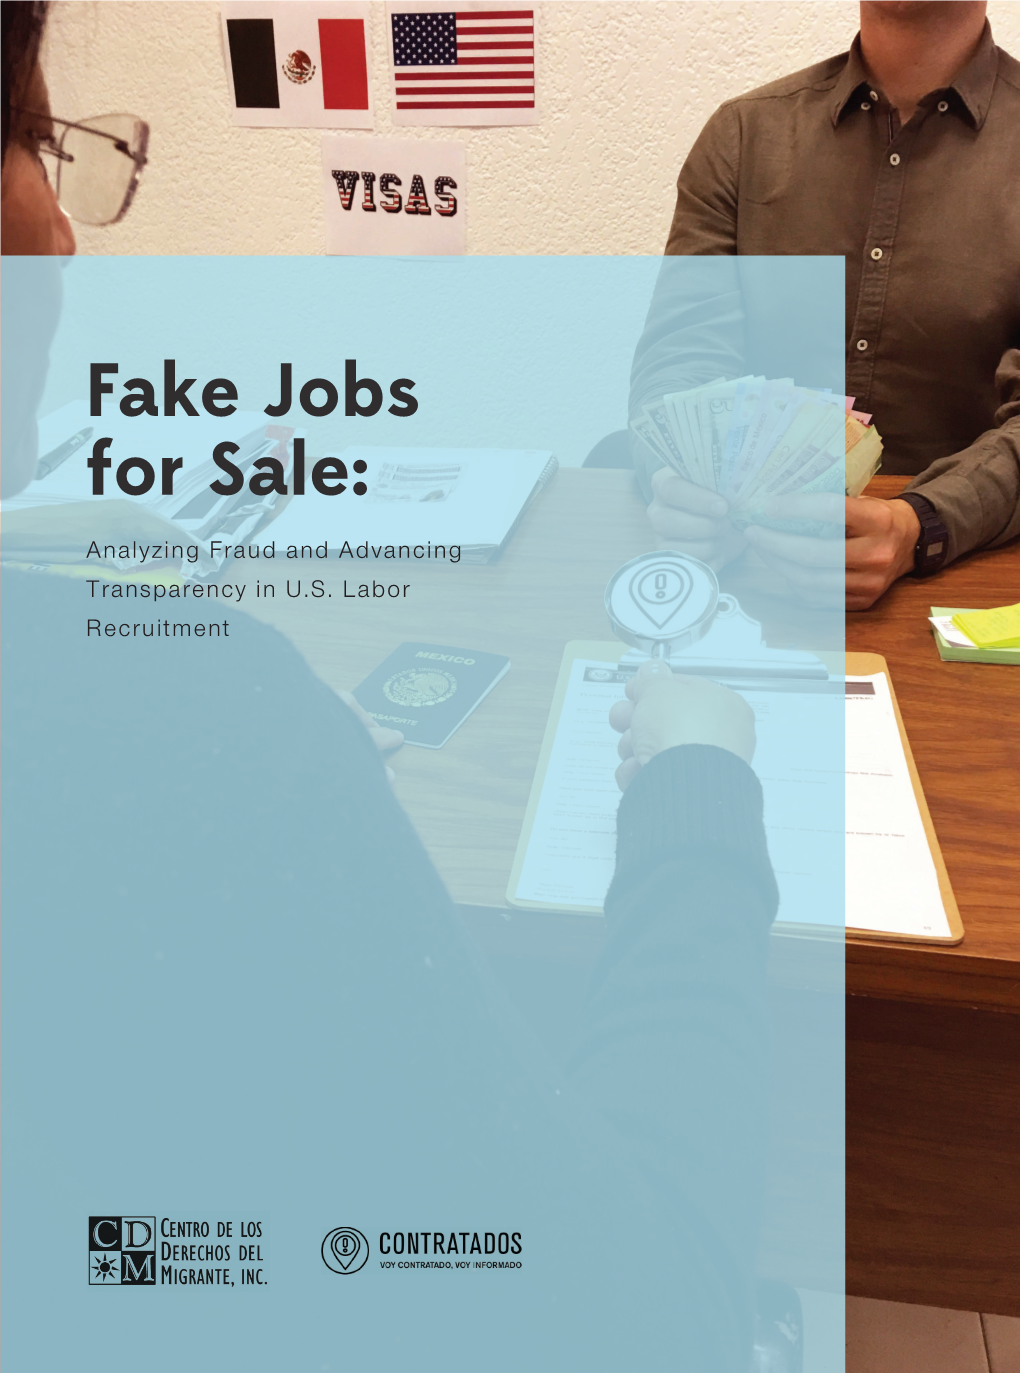 Fake Jobs for Sale: Analyzing Fraud and Advancing Transparency in U.S